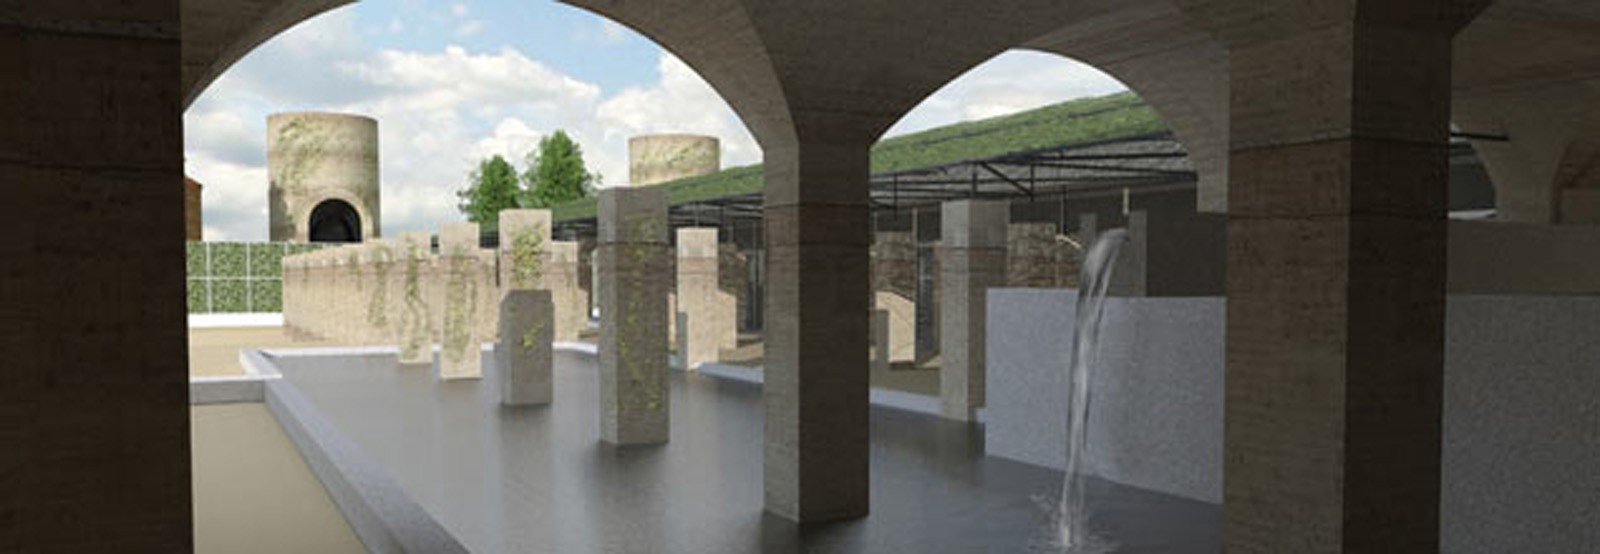 View of Proposed Fountain, Collage City Studio's plan for McMillan Park